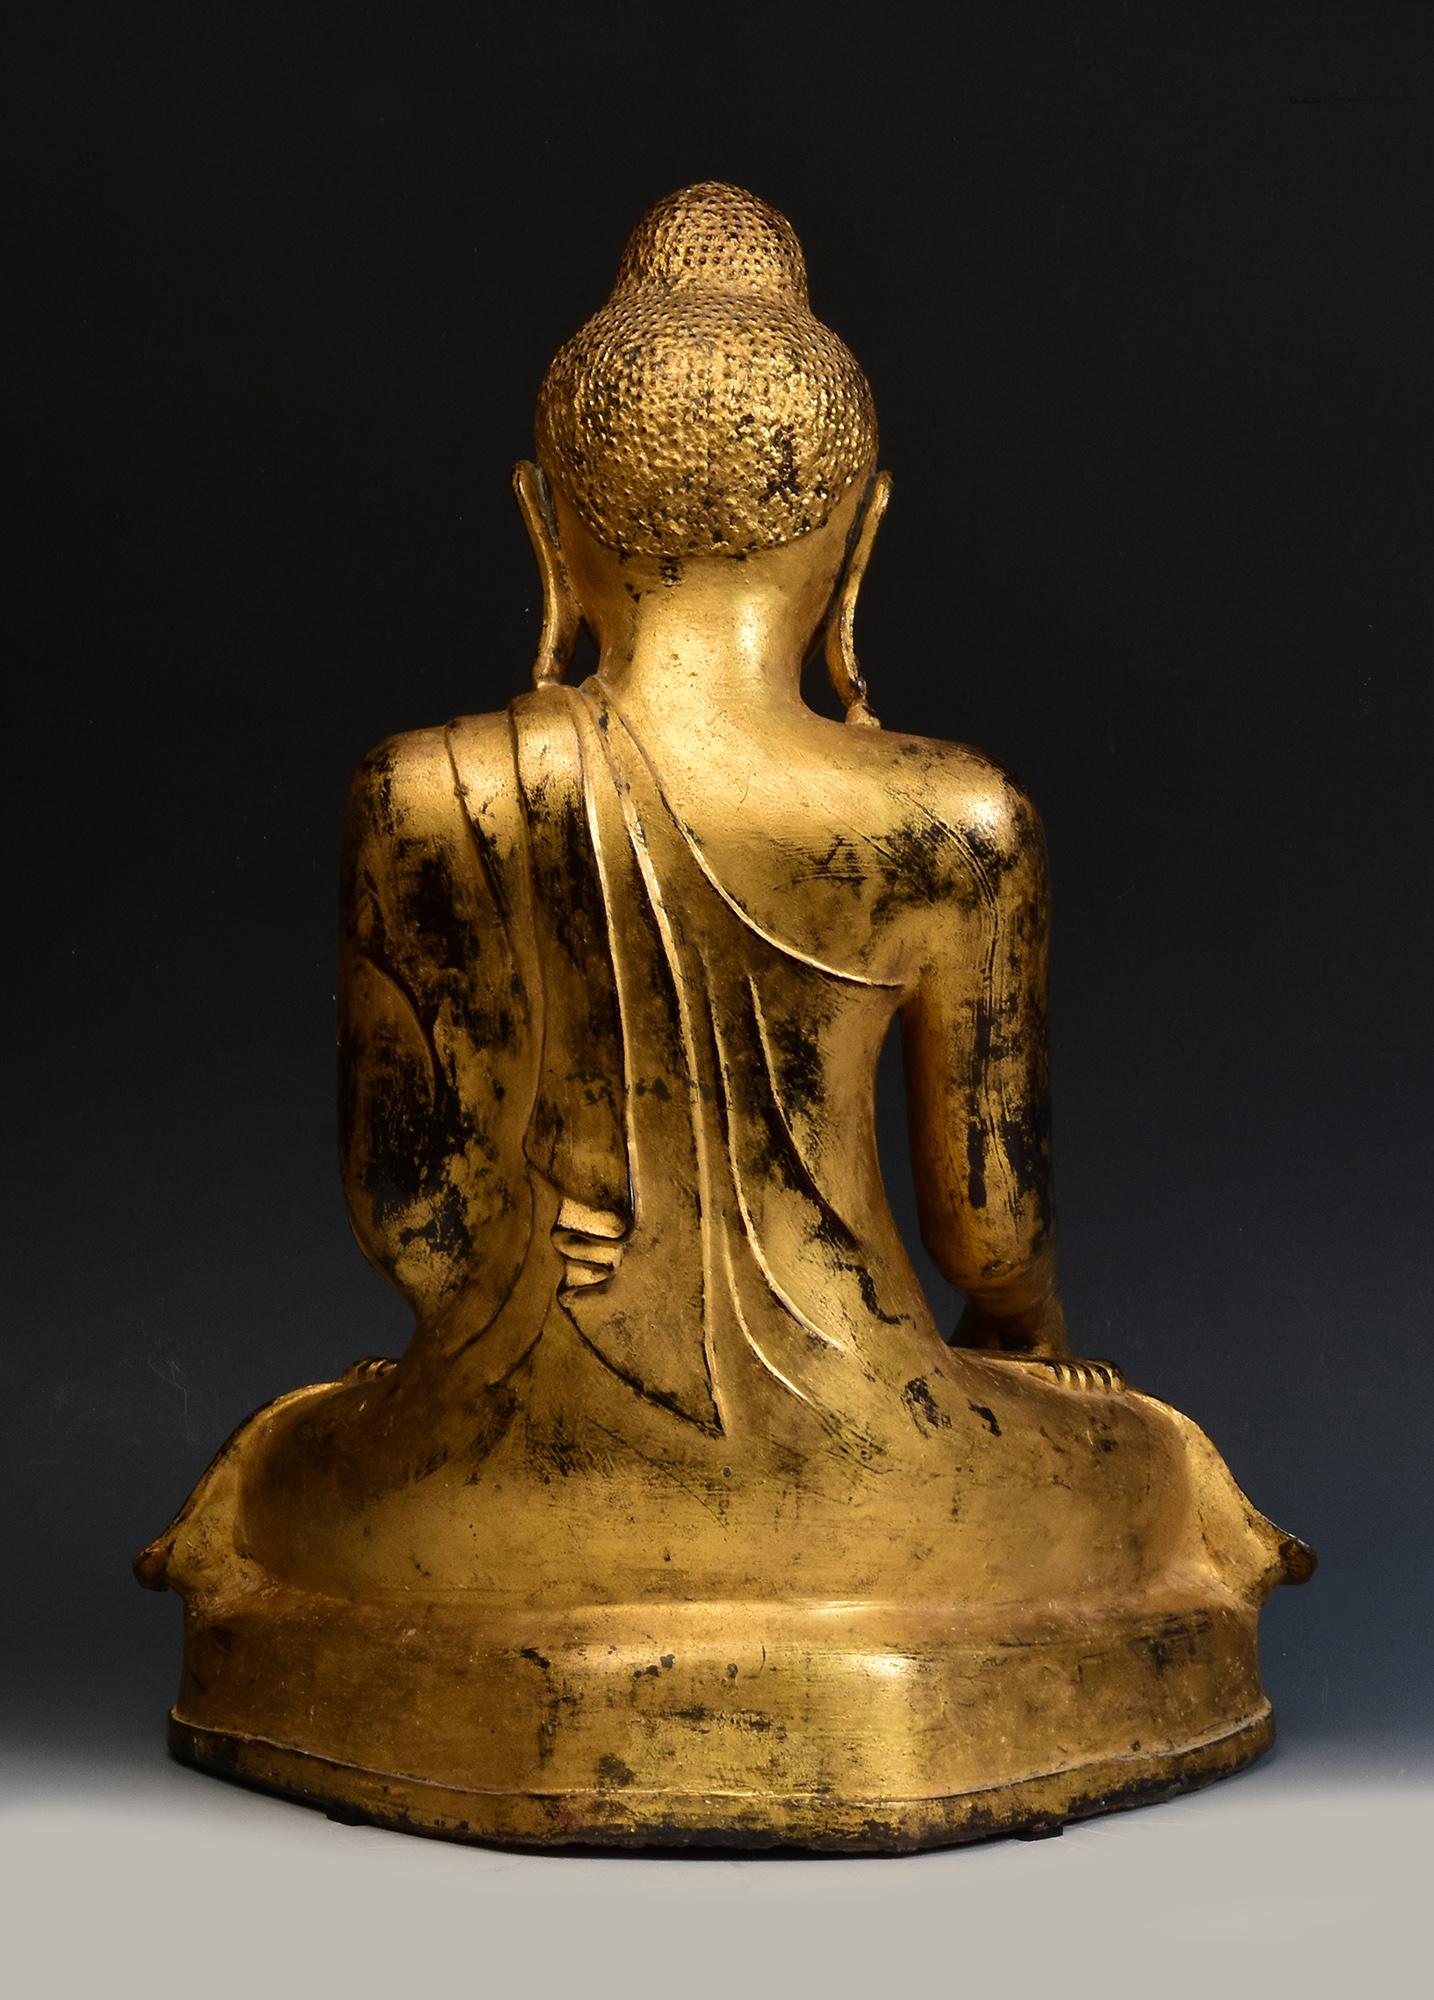 19th Century, Mandalay, Antique Burmese Bronze Seated Buddha with Gilded Gold For Sale 5